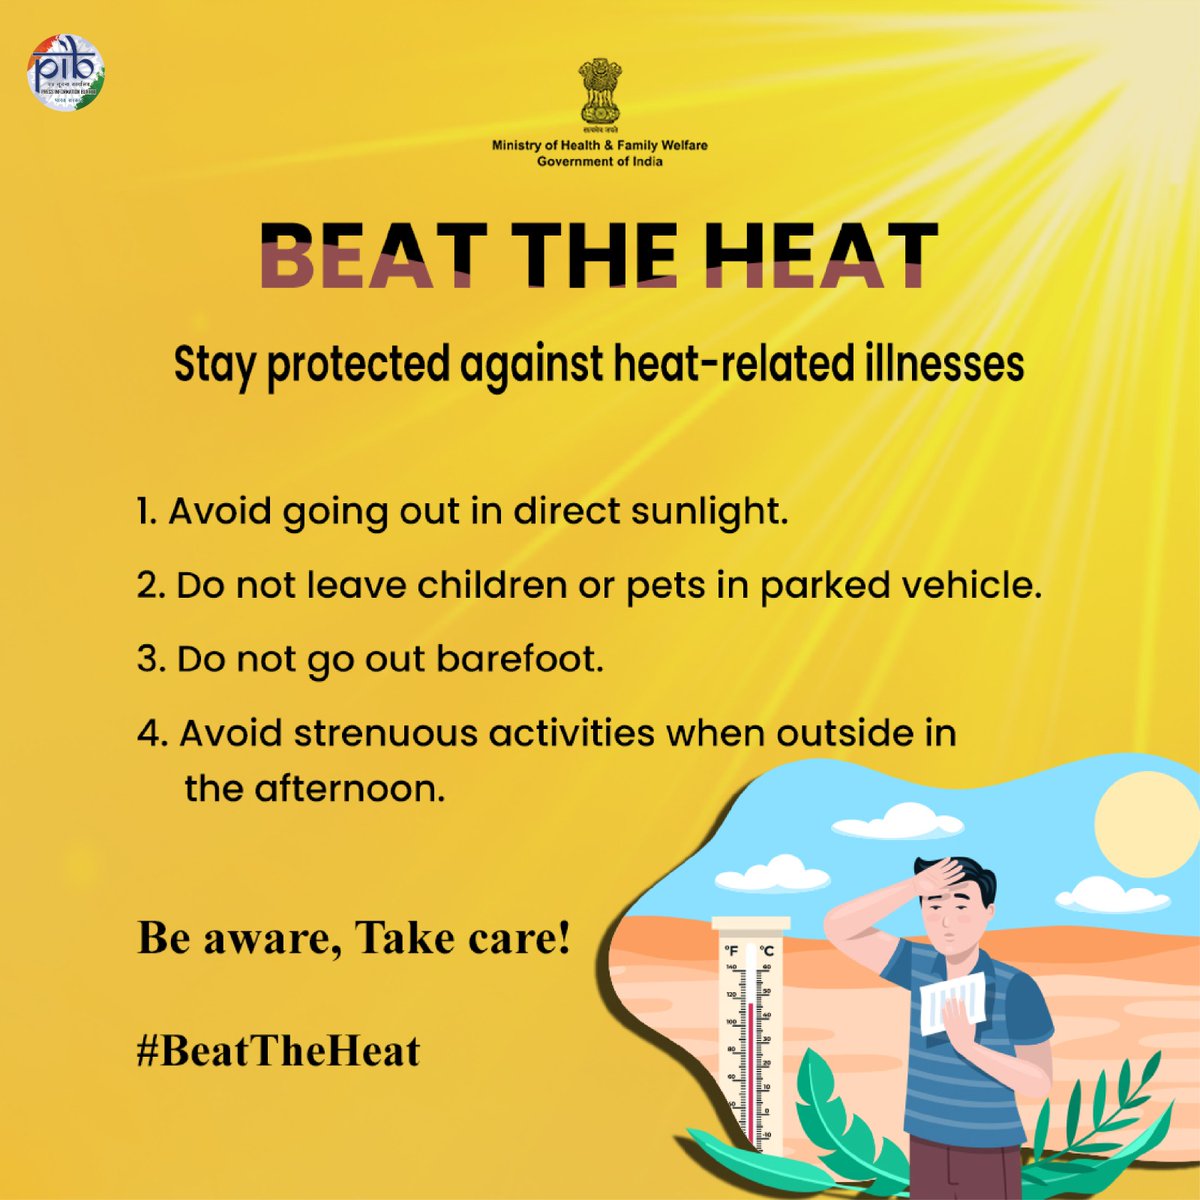 📝Public Health Advisory for Extreme Heat/Heatwave☀️ 👉Do not leave children or pets in parked vehicle 👉Do not go out barefoot #BeatTheHeat #HeatWave @MoHFW @MIB_India @IMDWeather @PIB_India